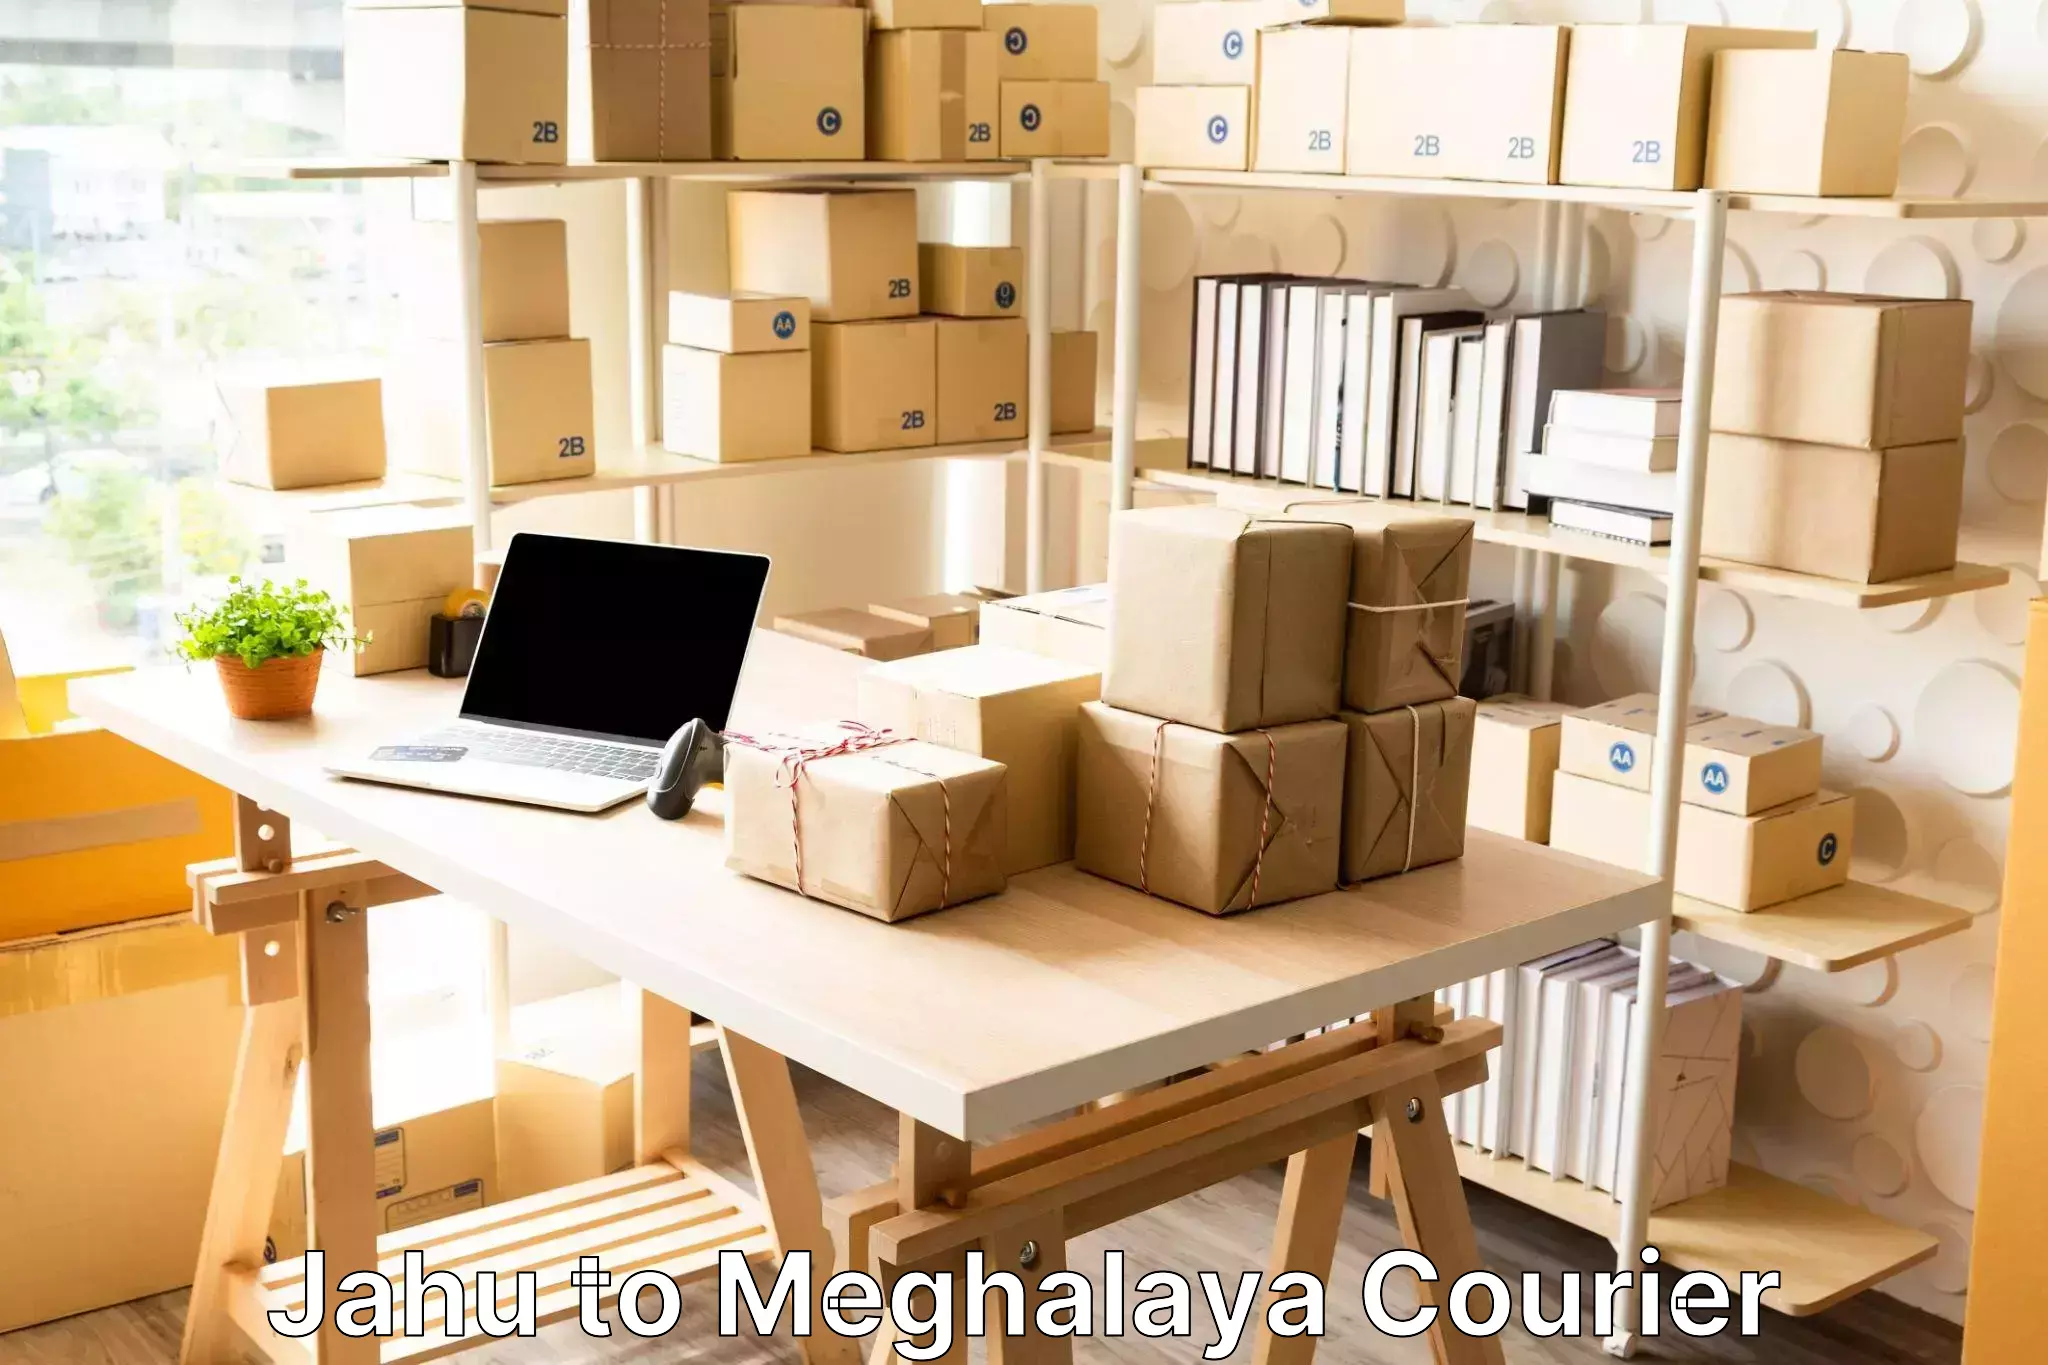 Baggage delivery support Jahu to Meghalaya